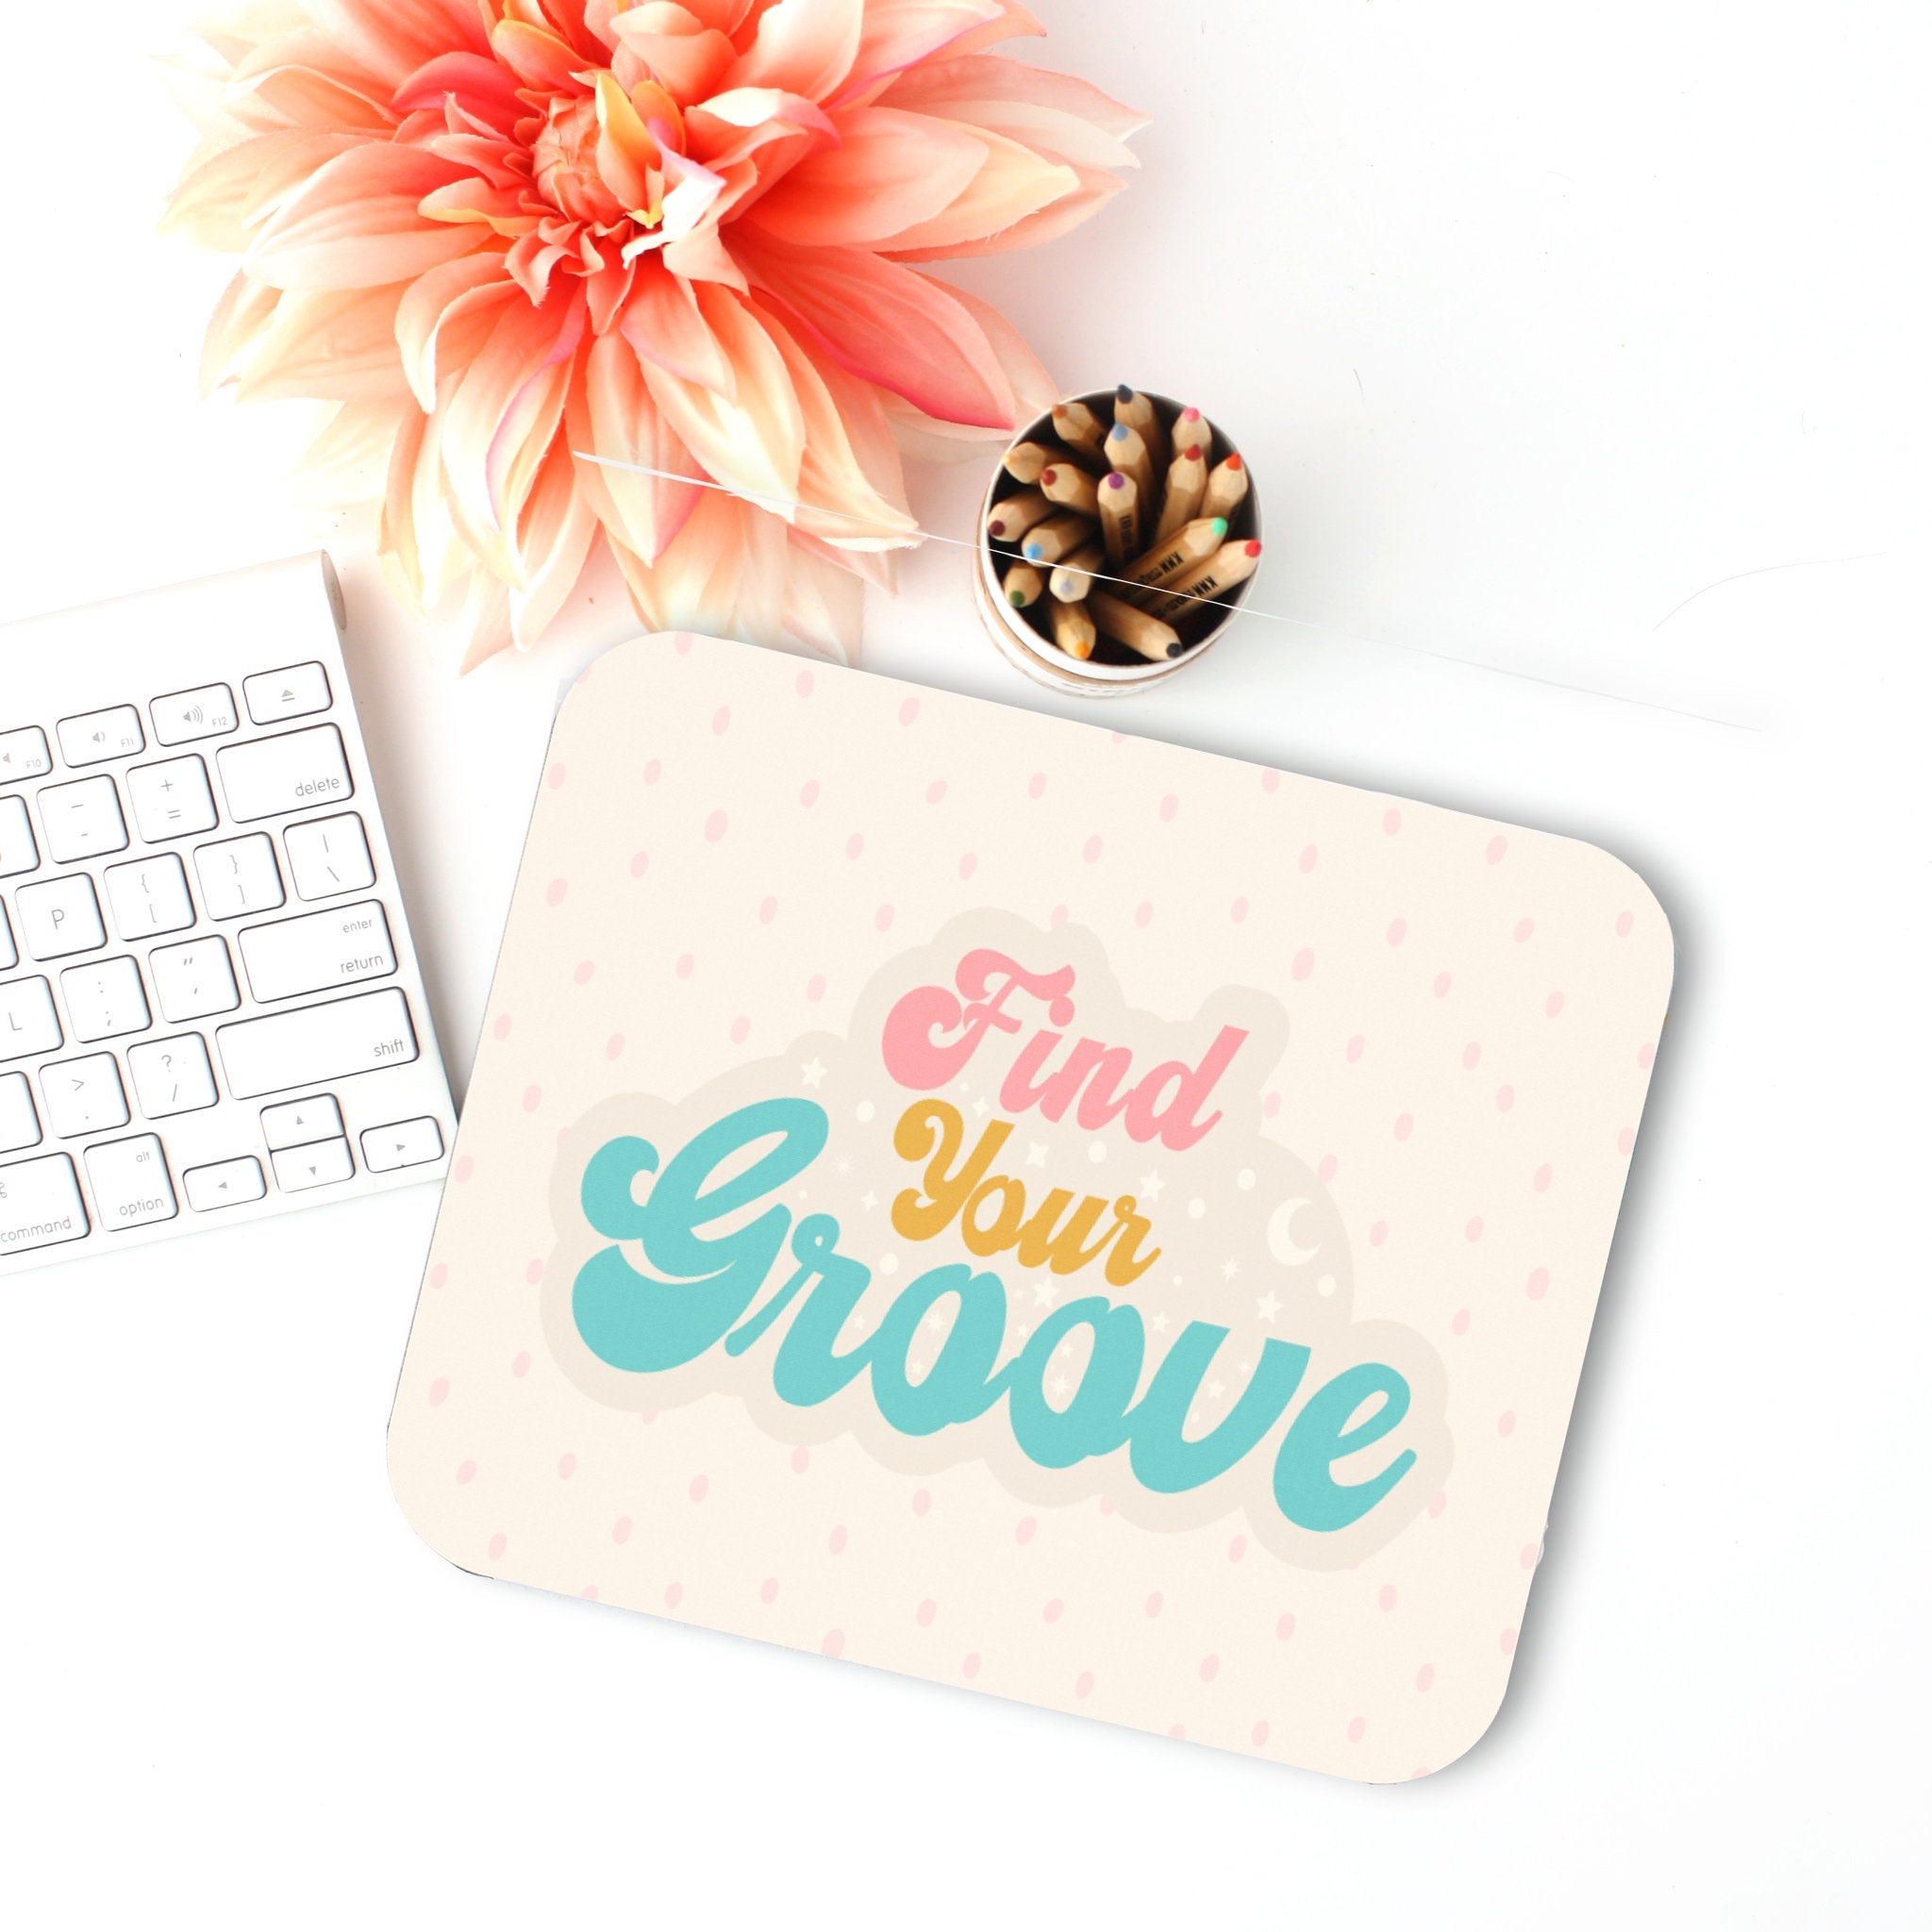 Find Your Groove Mouse Pad, Desk Accessories, Office Decor for Women, Office Gifts, Print Mouse Pad, Co-worker Gift, Work From Home Gift